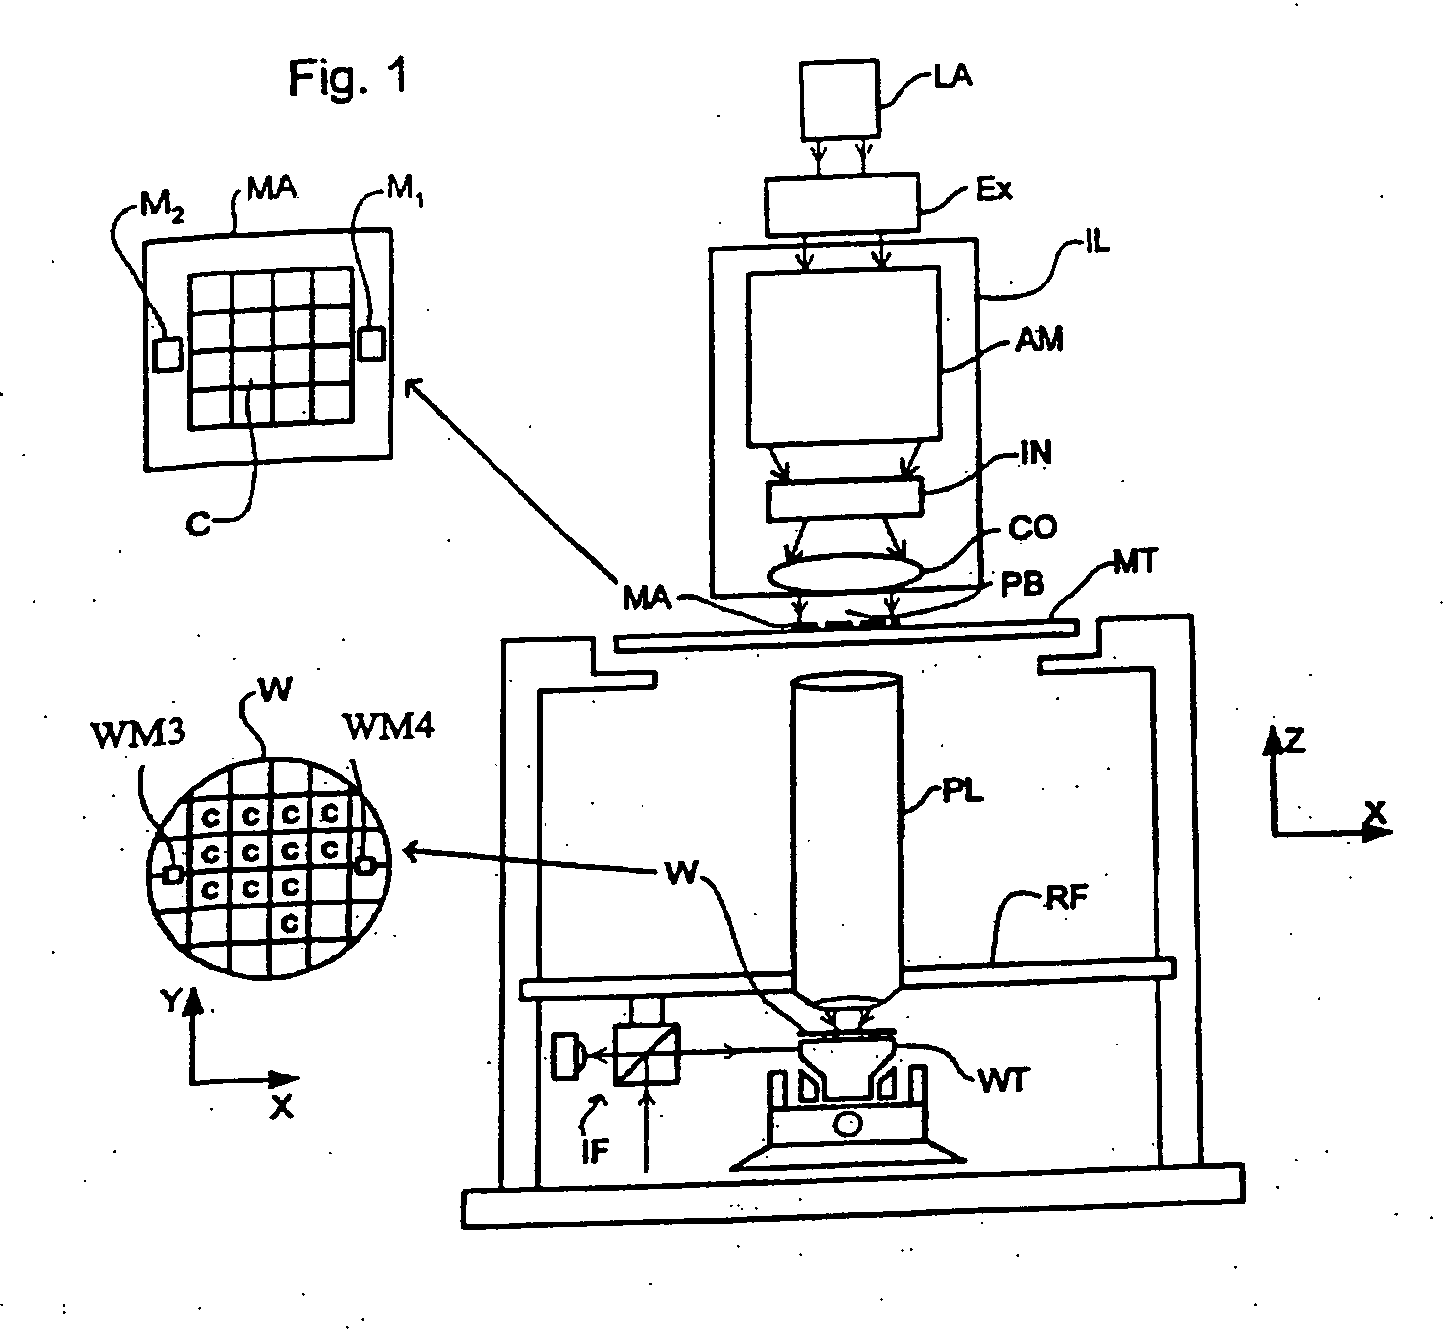 System and method of monitoring and diagnosing system condition and performance